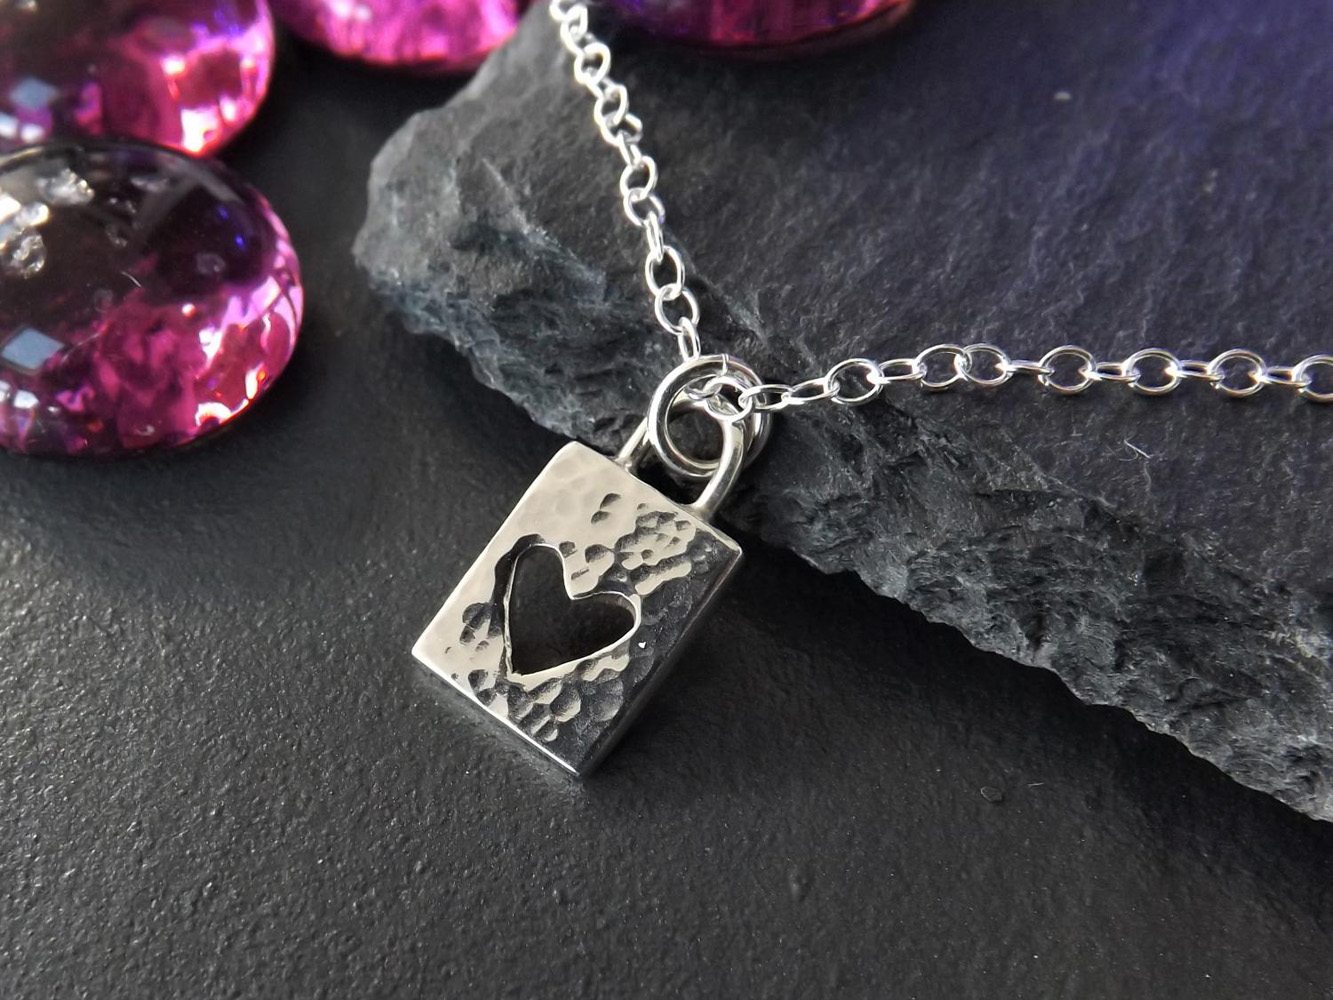 Sweethearts Padlock Necklace, Handmade hammered silver pendant on 16 inch sterling silver chain